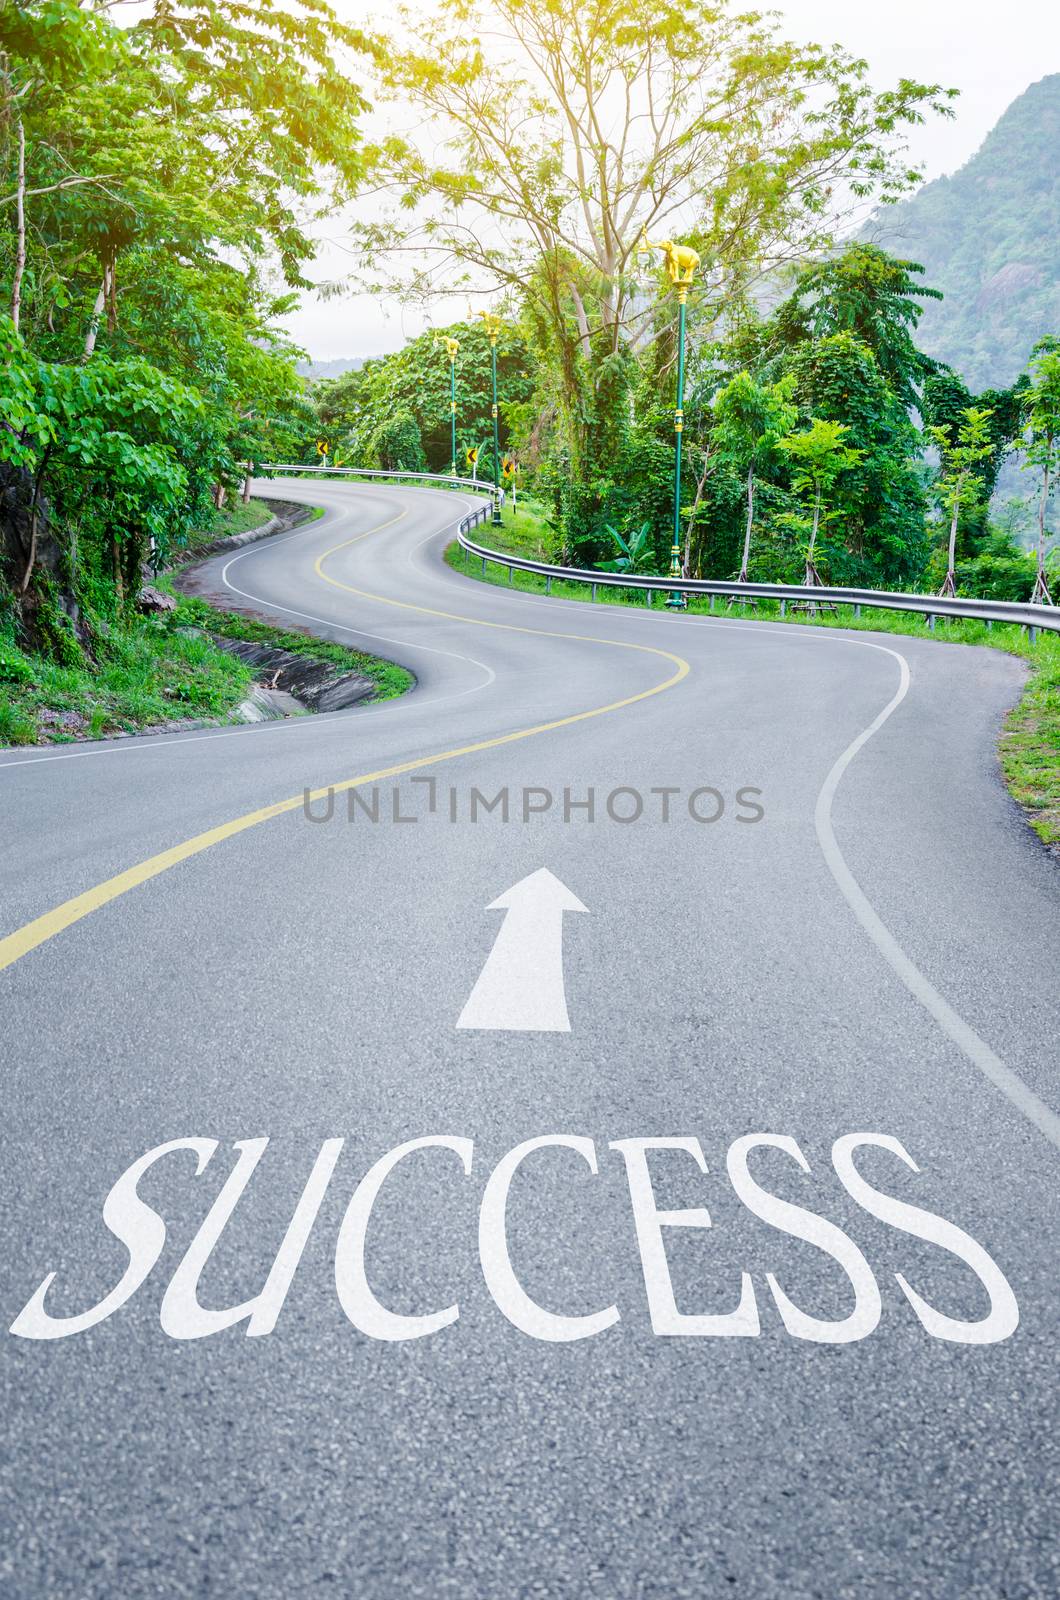 Road that says success in the asphalt on S curve road in the green view.